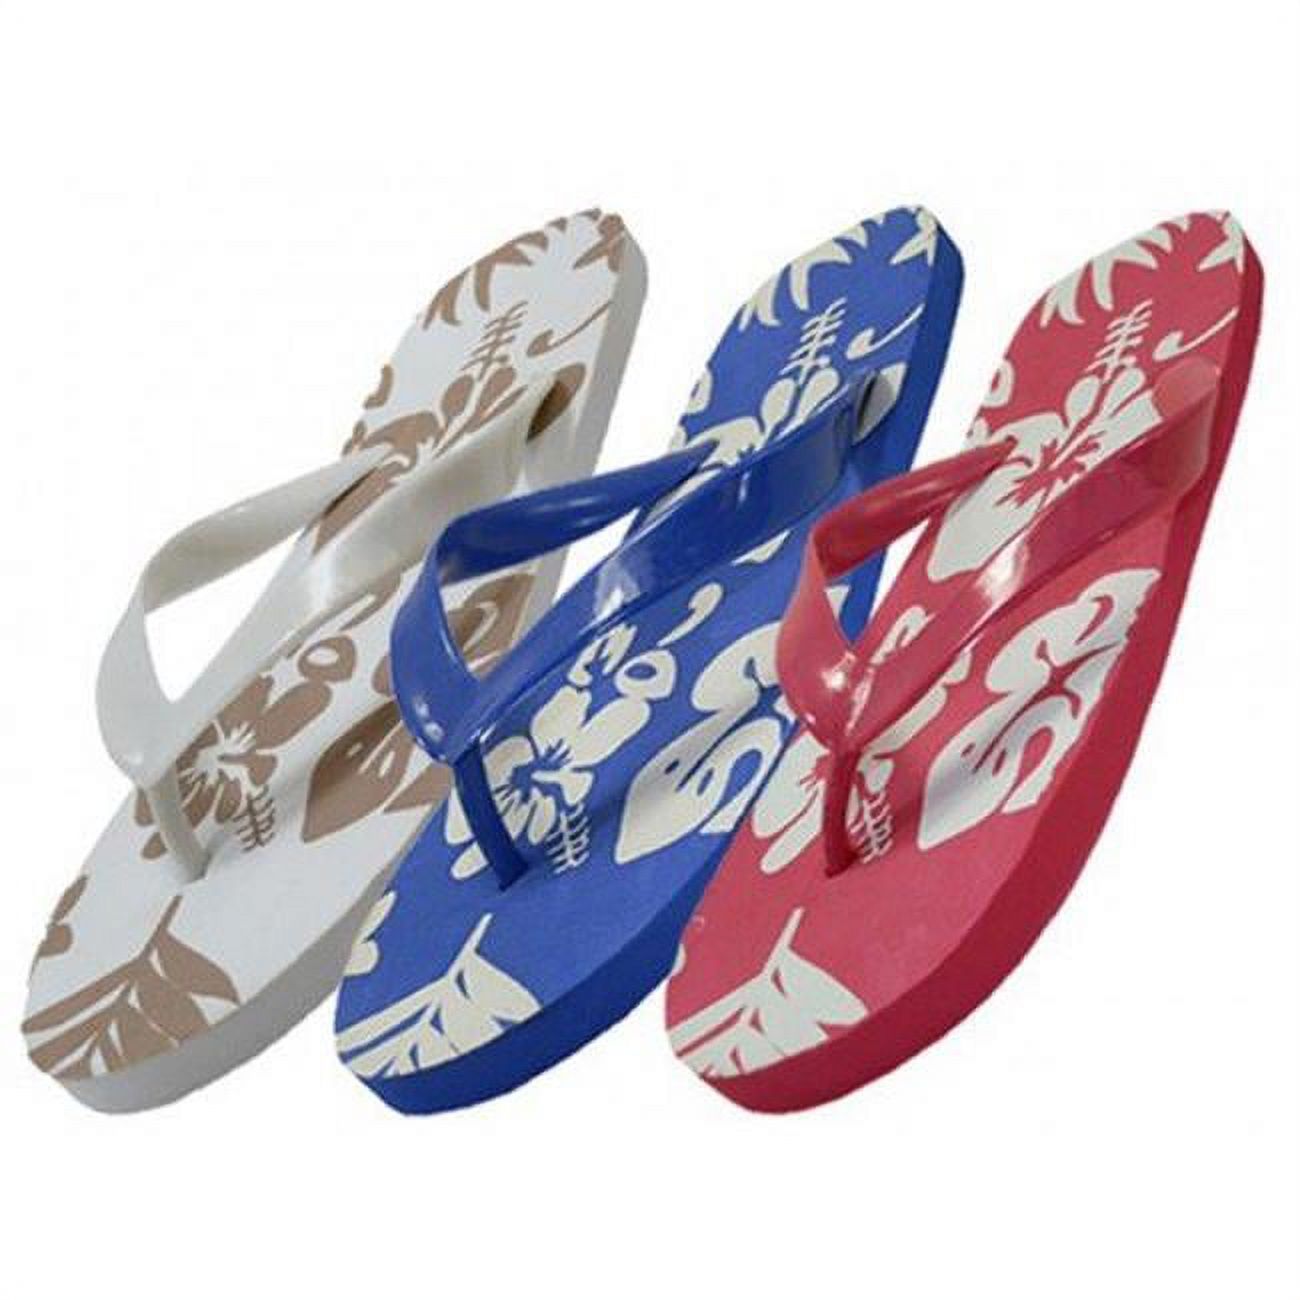 DDI 1934209 Men&apos;s Insole Floral Printed Flip Flop (48 pairs) Case of 48 - image 1 of 1